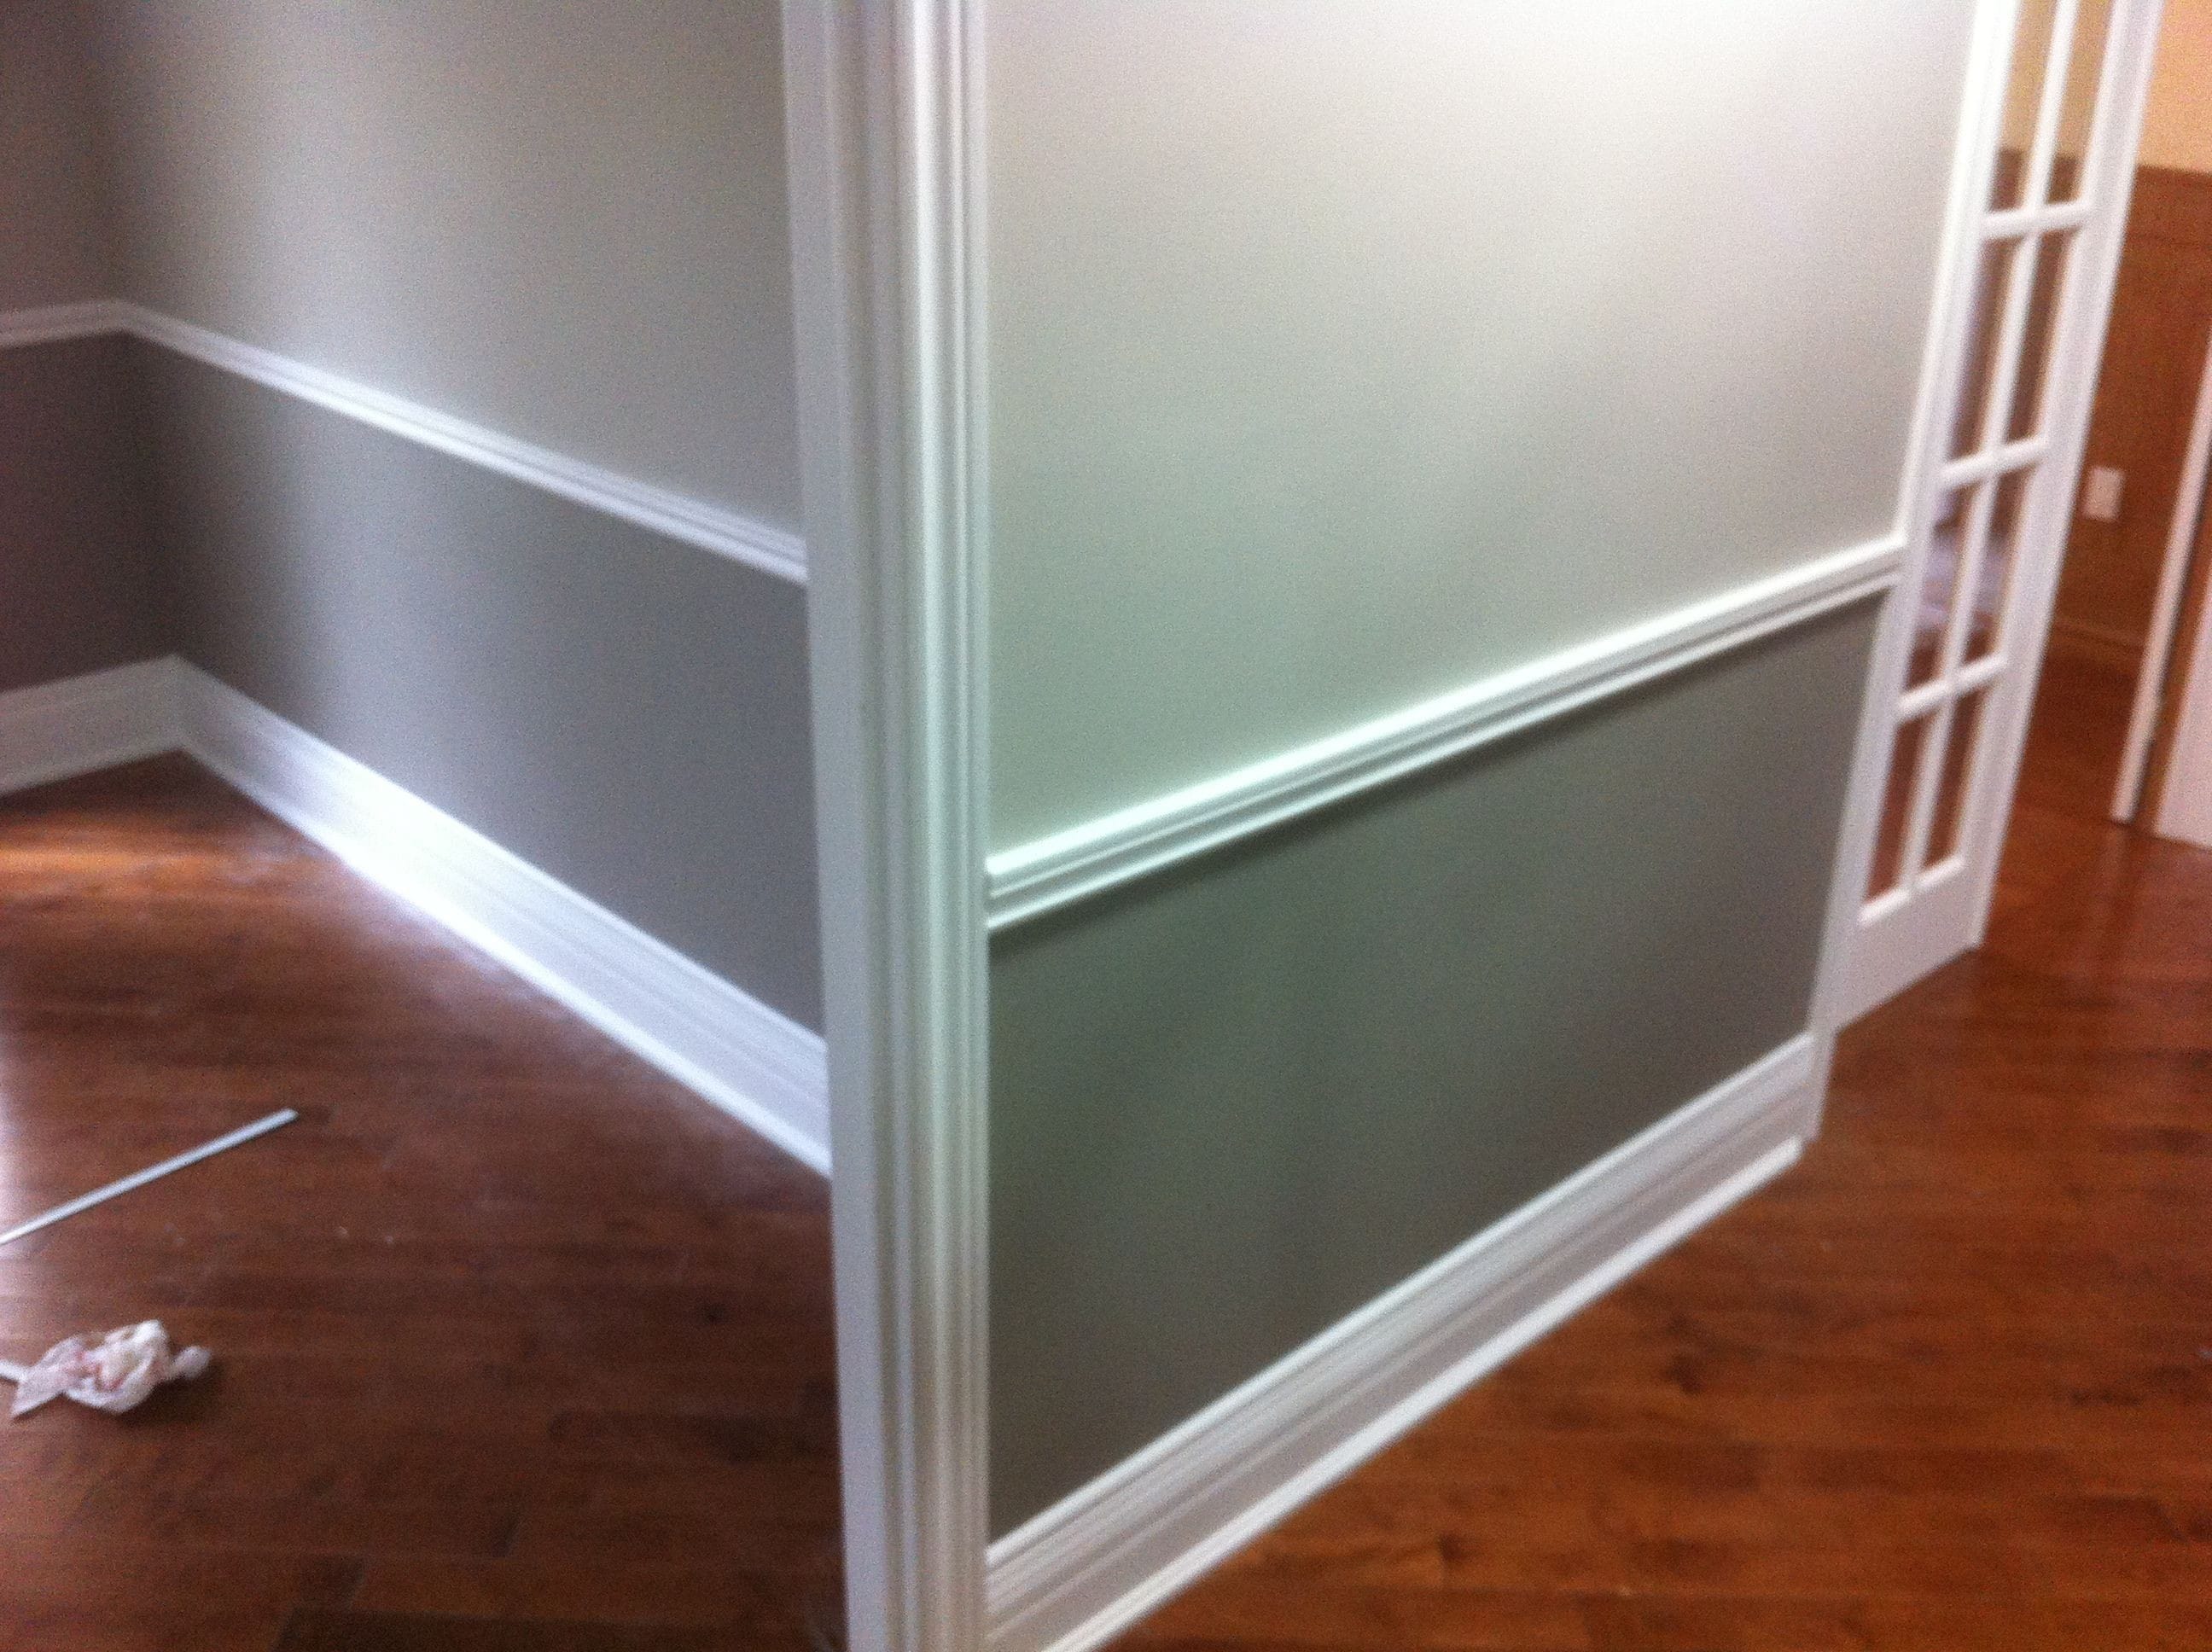 A recent painter job in the  area